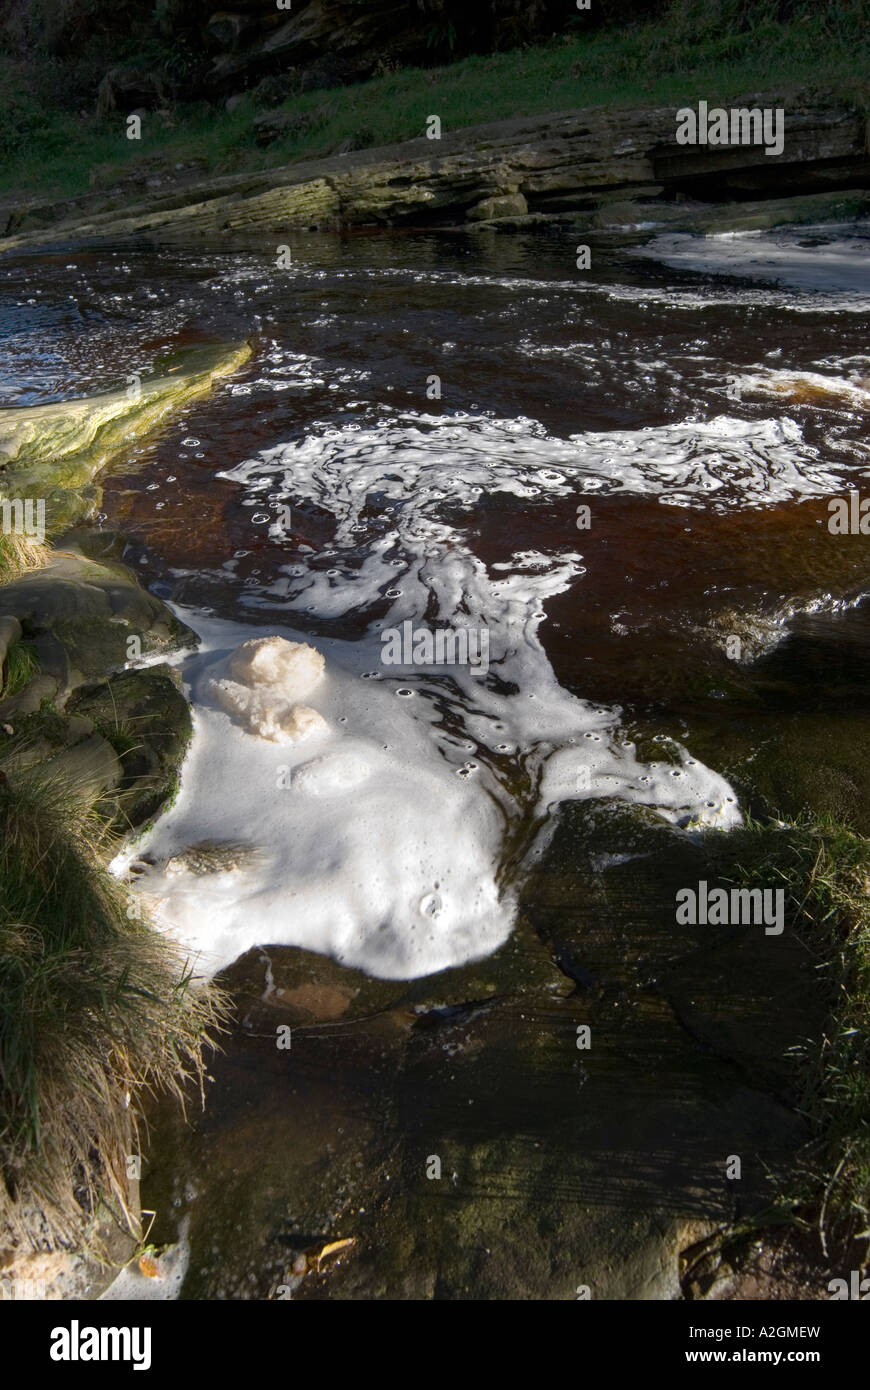 Froth on the River Etherow which flows off the peat moorland on the Yorkshire Derbyshire border Stock Photo